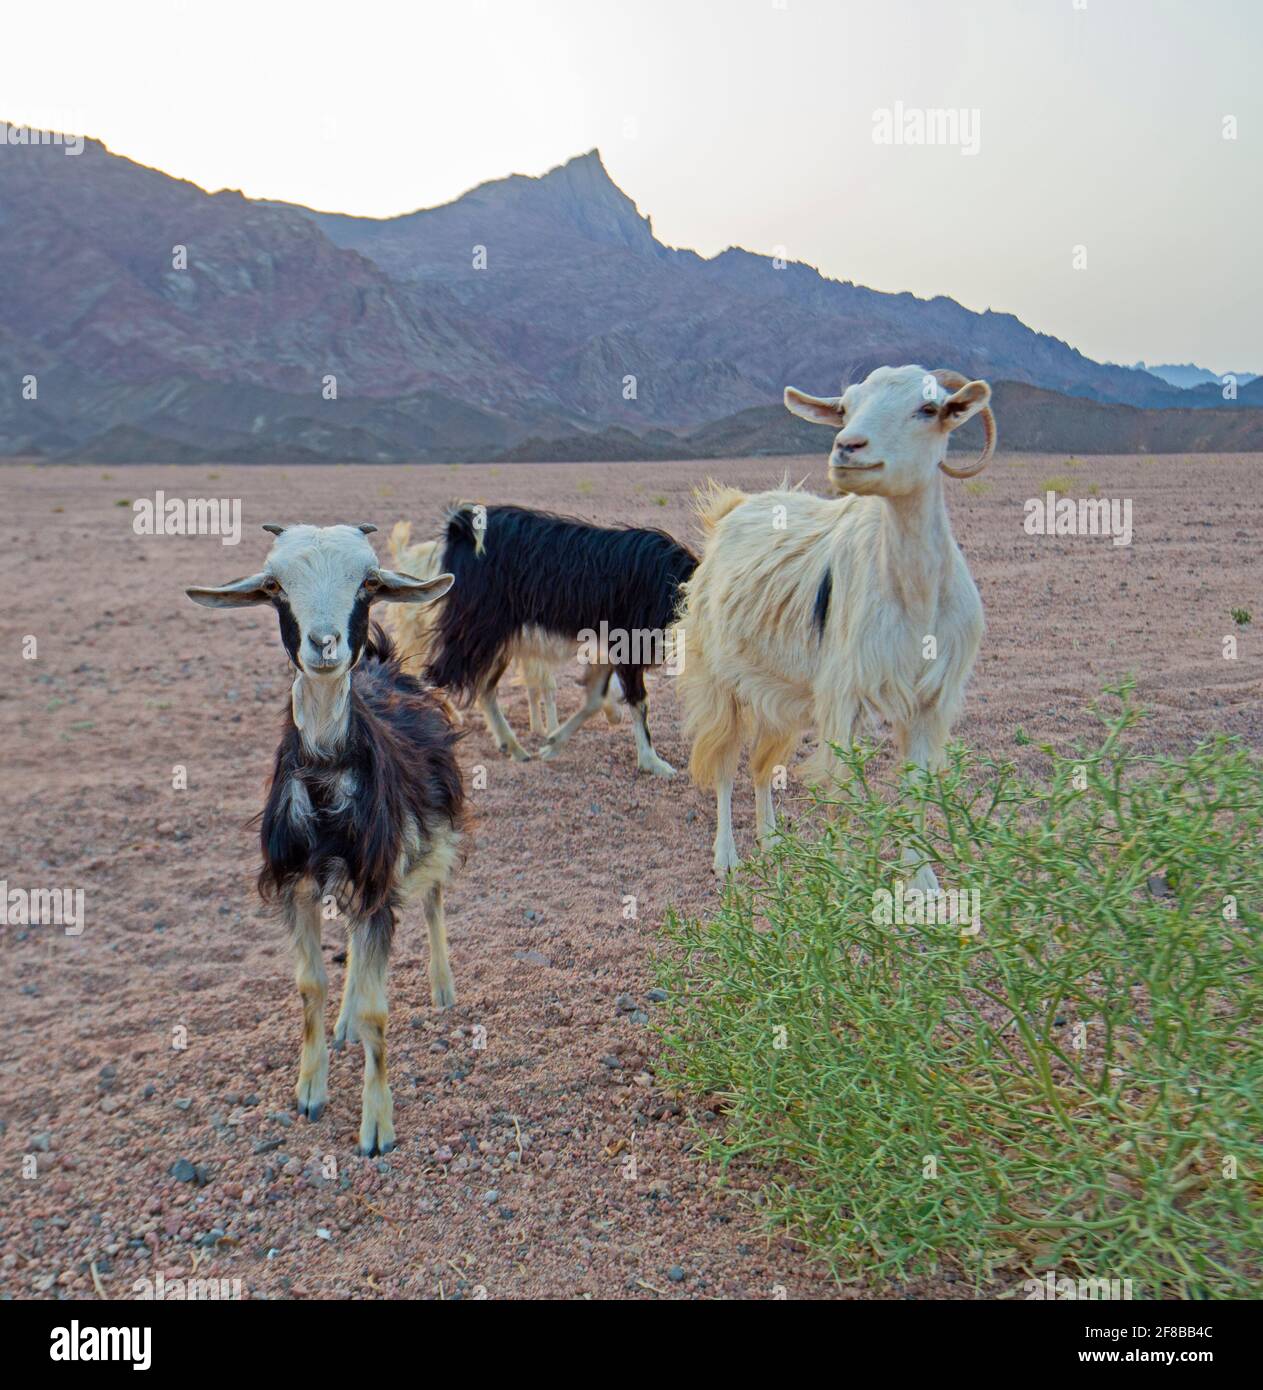 Landscape scenic view of desolate barren eastern desert in Egypt with herd of Sahelian Peulh goats and mountains Stock Photo